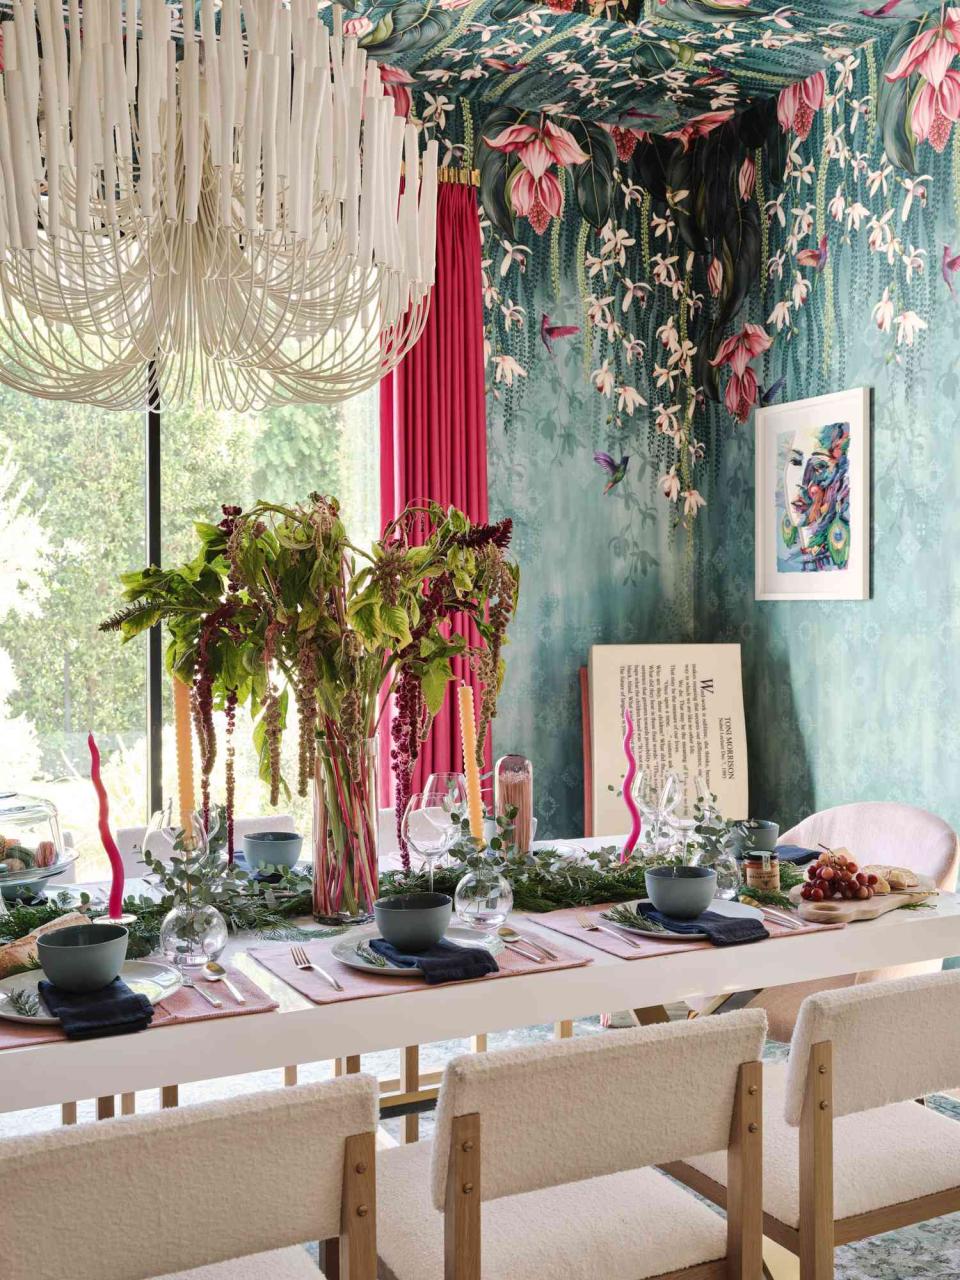 9 Dining Table Decor Ideas For Hosting Dinner Parties